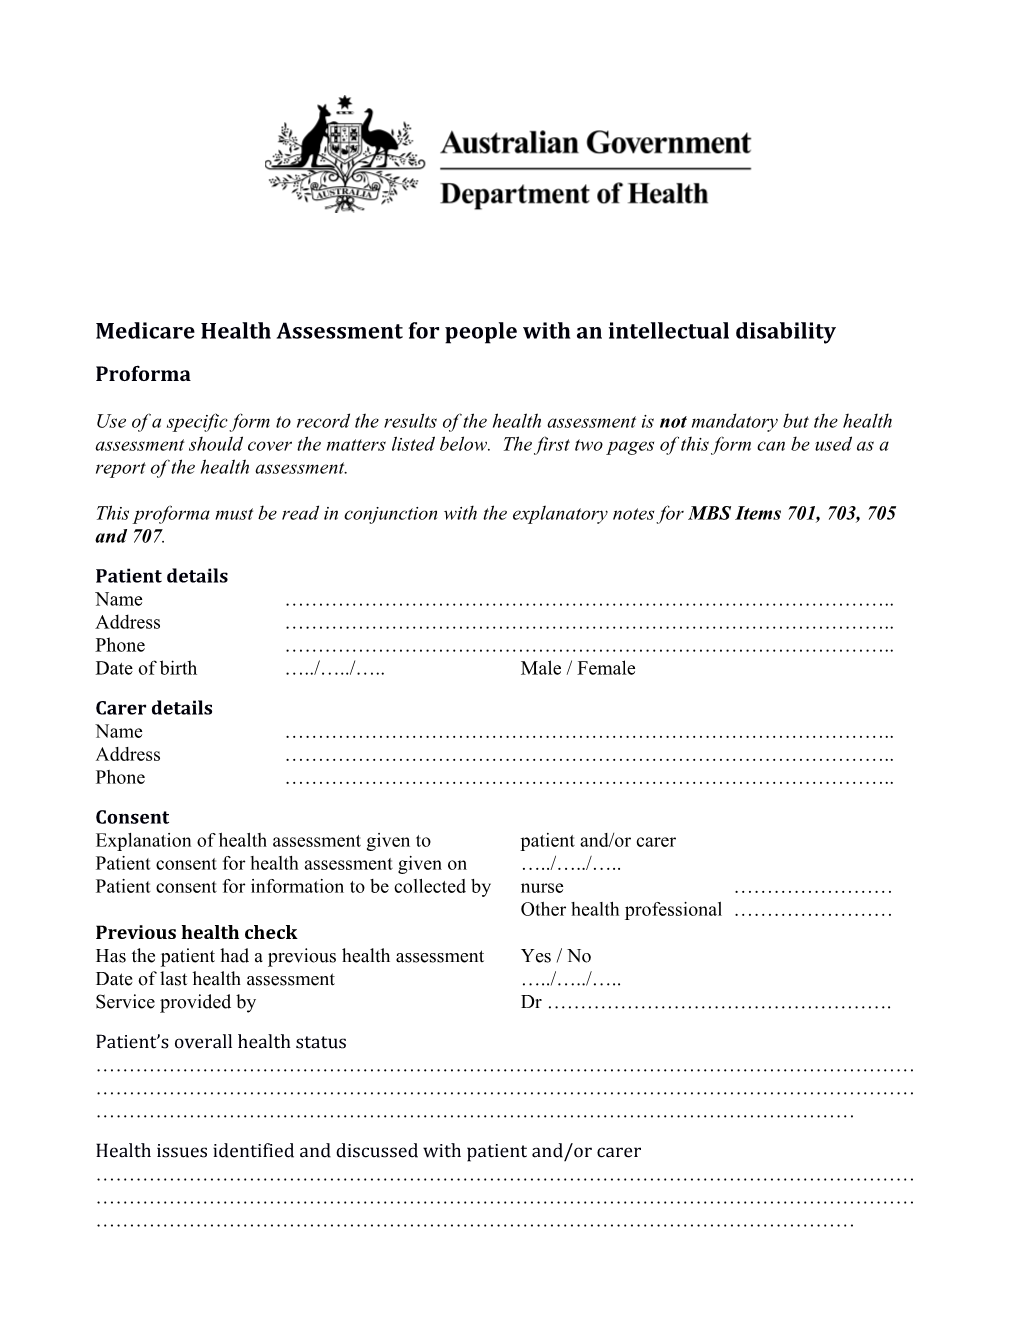 Medicare Health Assessment for People with an Intellectual Disability